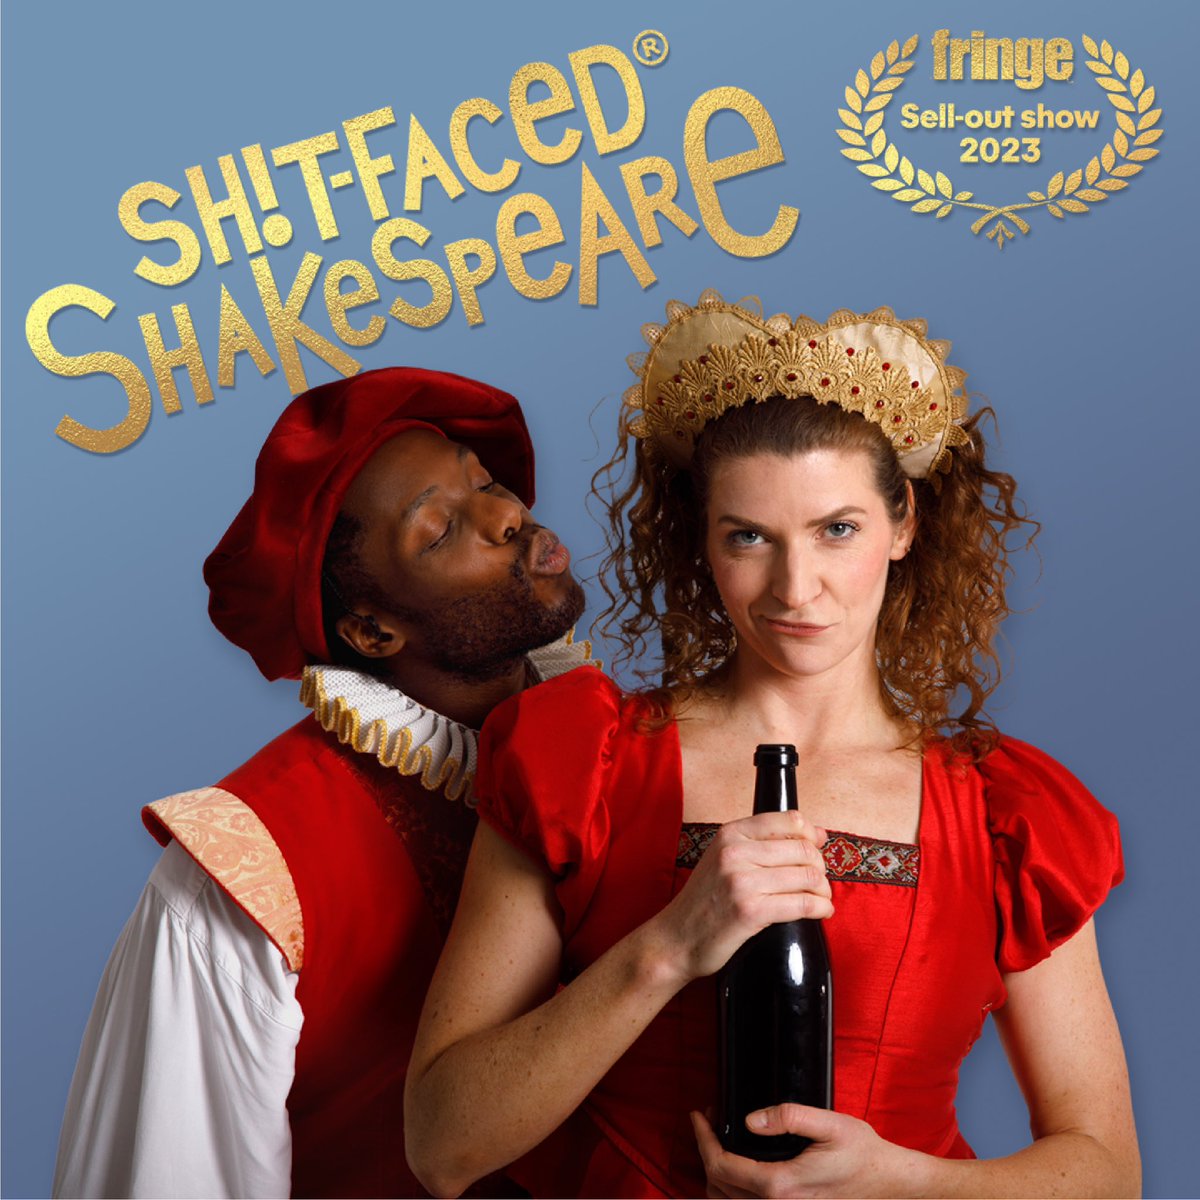 Hear Thee! We doth return our 11th @edfringe Thou shalt find us p'rf'rming nightly, Much Ado About Nothing, for @thepleasance at Ye Olde @eicc_uk Tickets on sale anon! • 9pm/10pm Captioned Performance 16th #alwaysenjoyshakespeareresponsibly #itsbettershitfaceddontyouthink